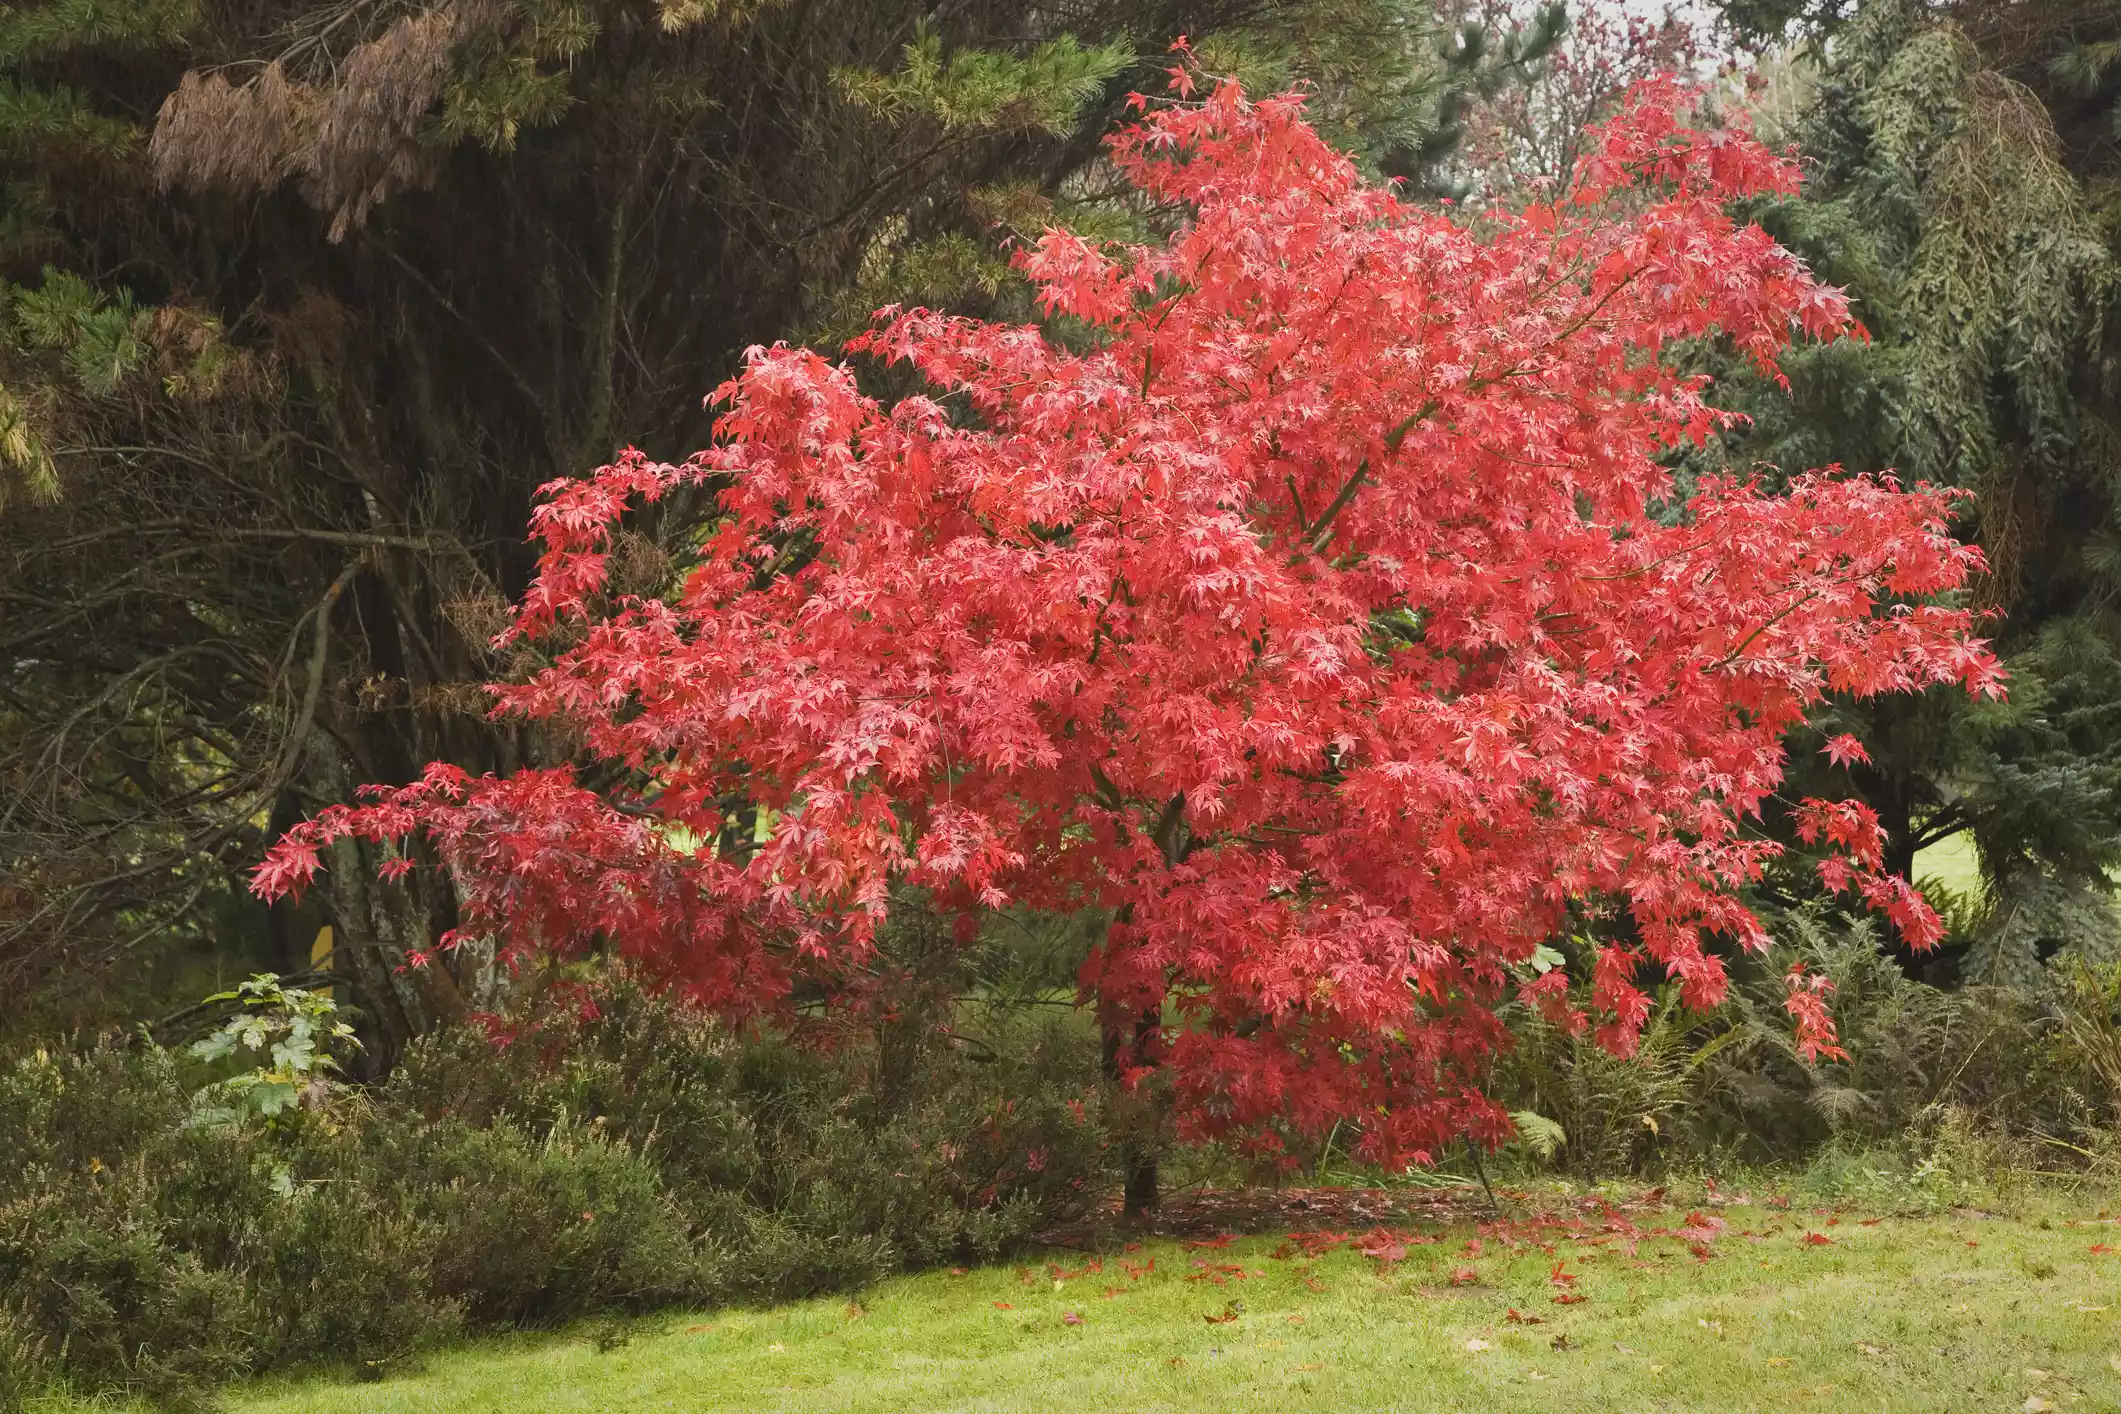 Japanese maple with red leaves at the edge of a lawn.